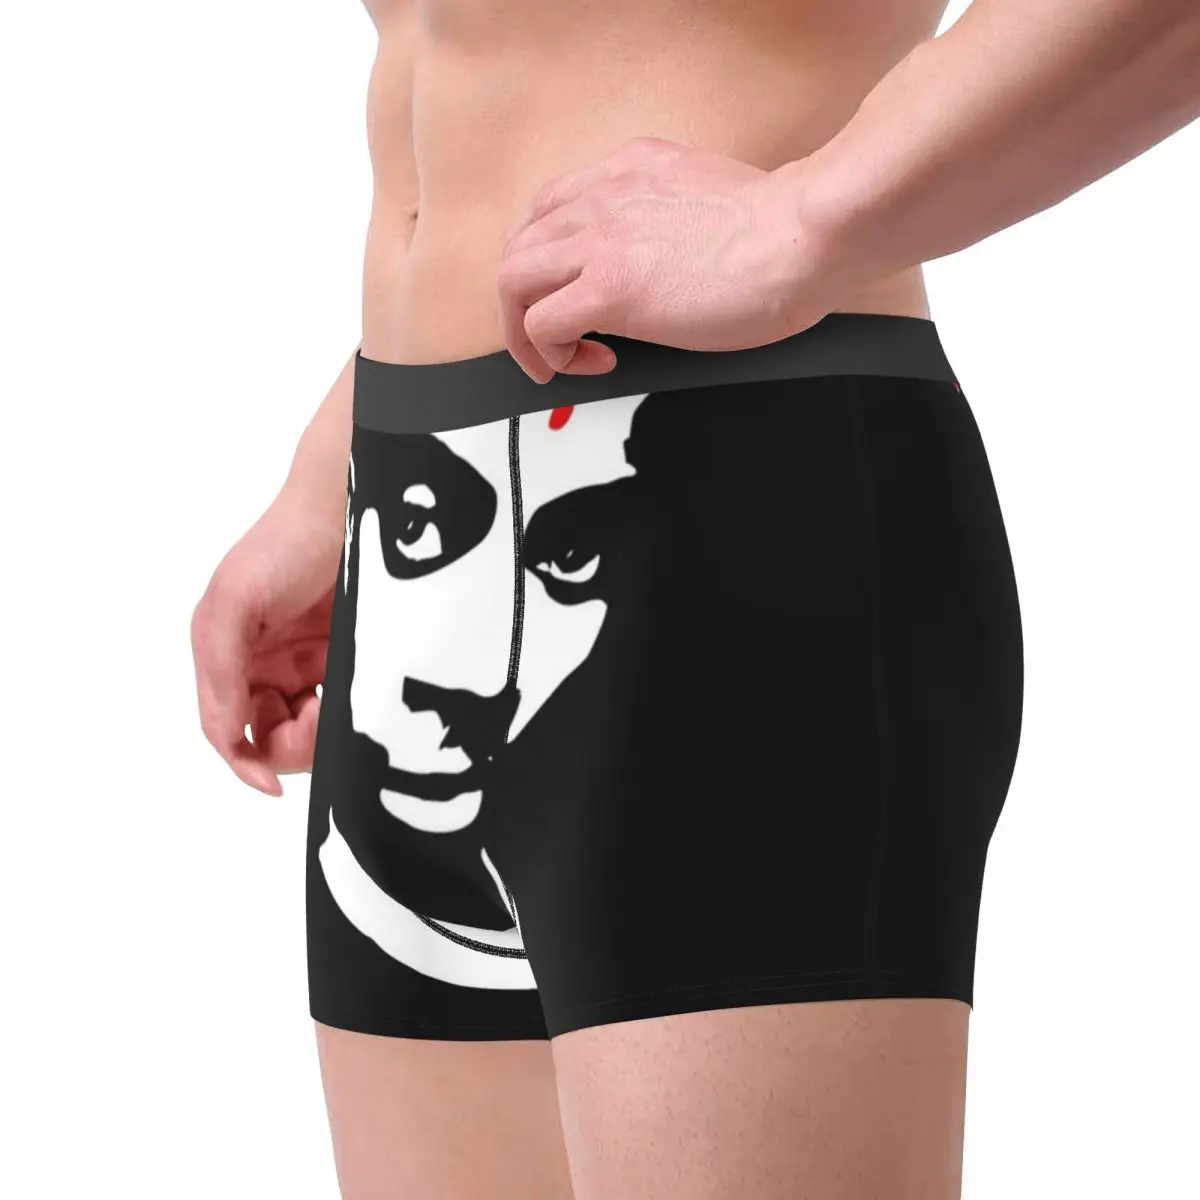 Whole Lotta Red Carti Underwear Playboi Carti Printing Boxershorts Hot Man  Underpants Breathable Shorts Briefs Gift - Boxers - AliExpress